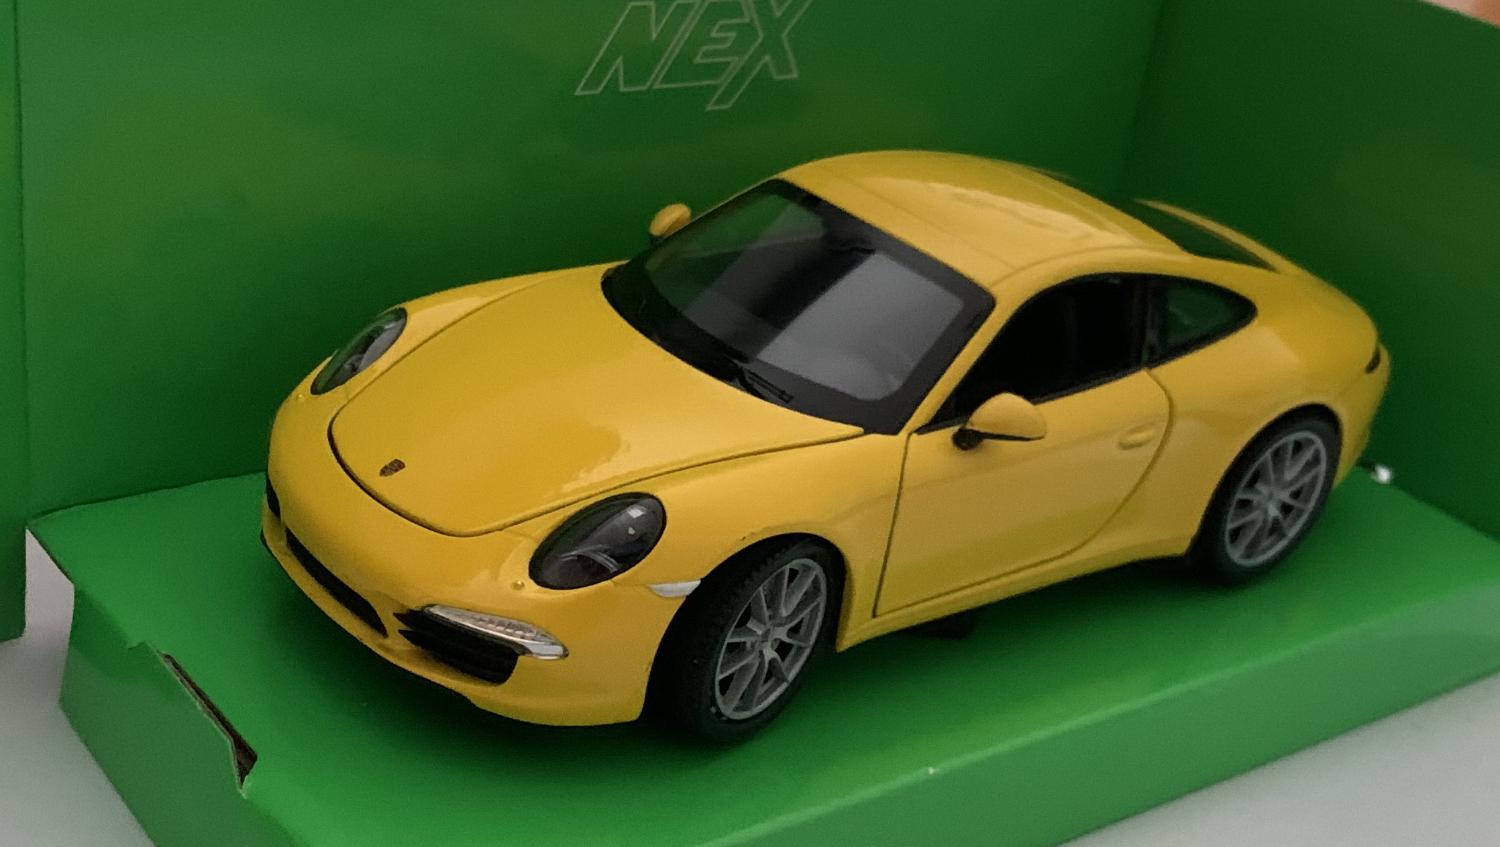 Porsche 911 Carrera S in yellow 1:24 scale diecast model from Welly